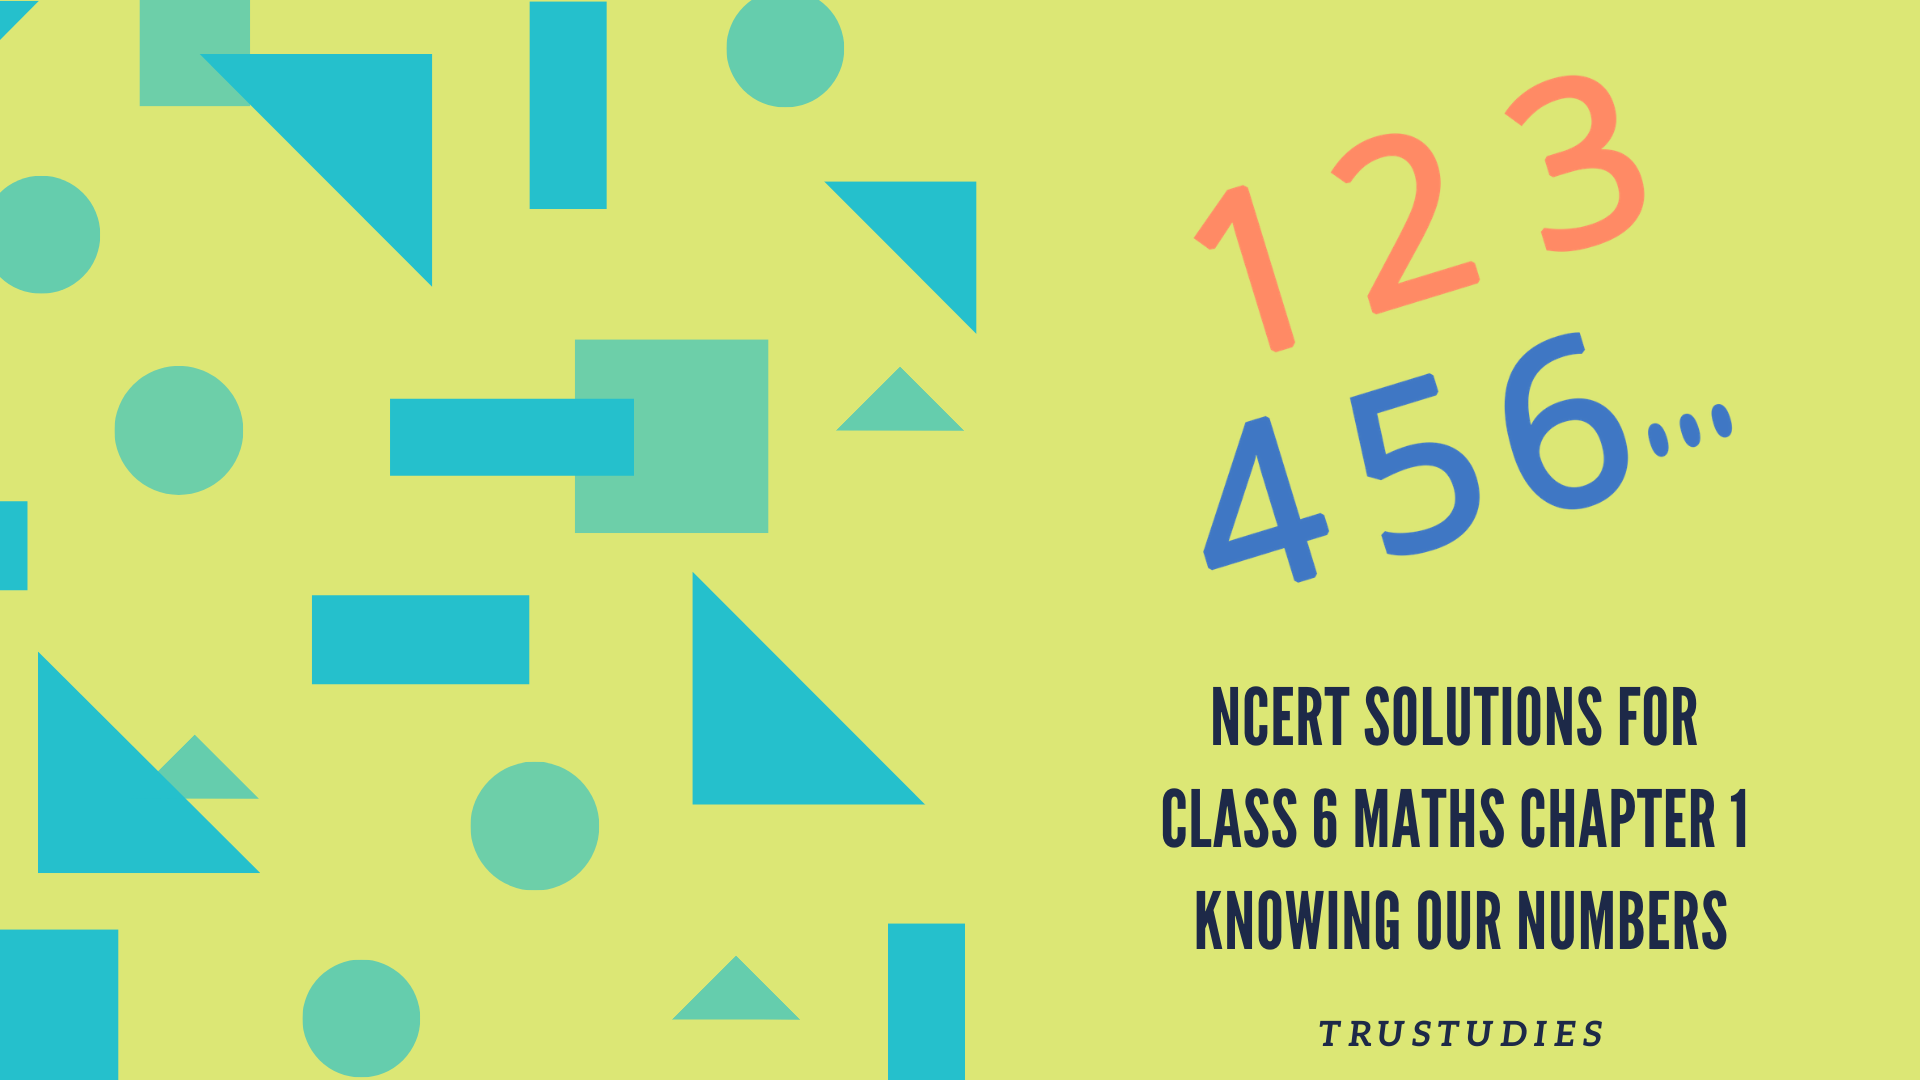 NCERT solutions for class 6 maths chapter 1 knowing our numbers banner image